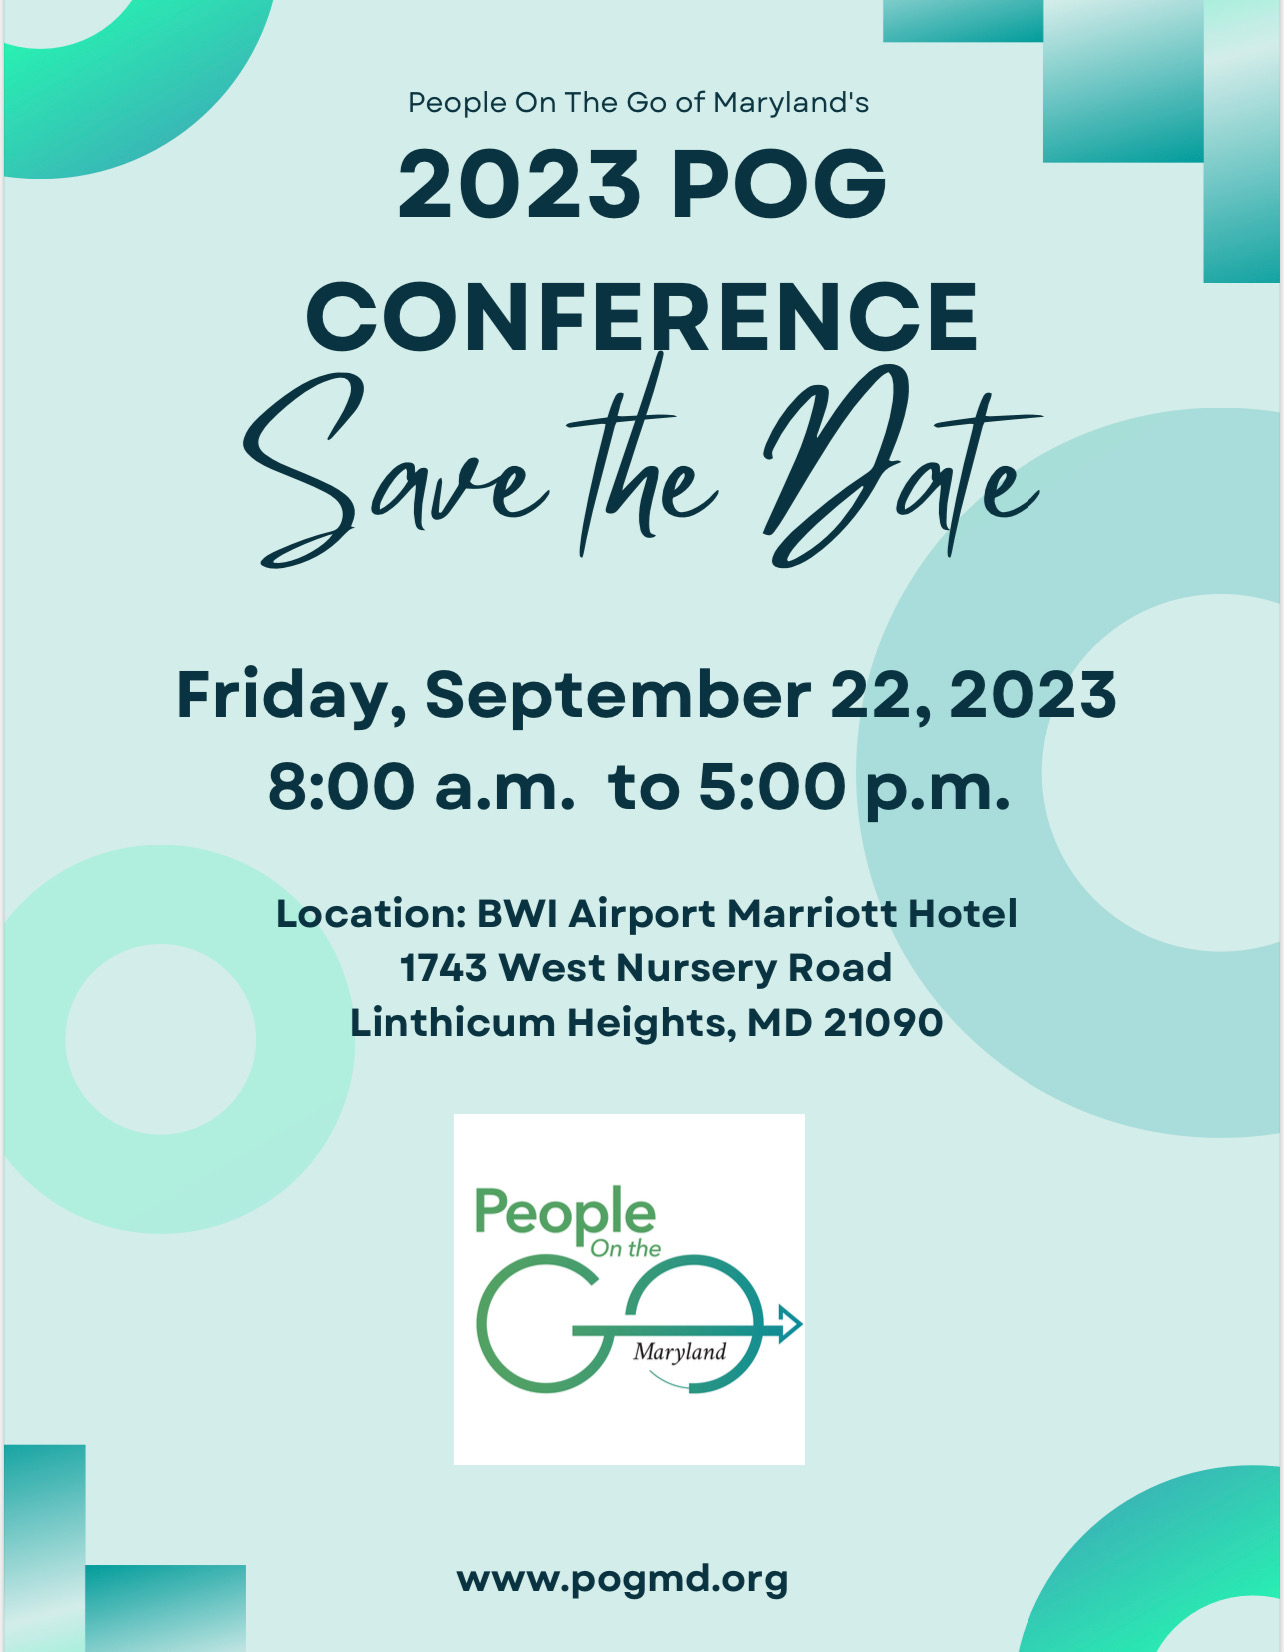 People on The Go of Maryland's 2023 POG Conference Save the Date. Friday, September 22, 2023 8 am to 5 pm. Location: BWI Airport Marriott Hotel, 1743 West Nursery Road, Linthicum Heights, MD 21090. For more information, visit www.pogmd.org.